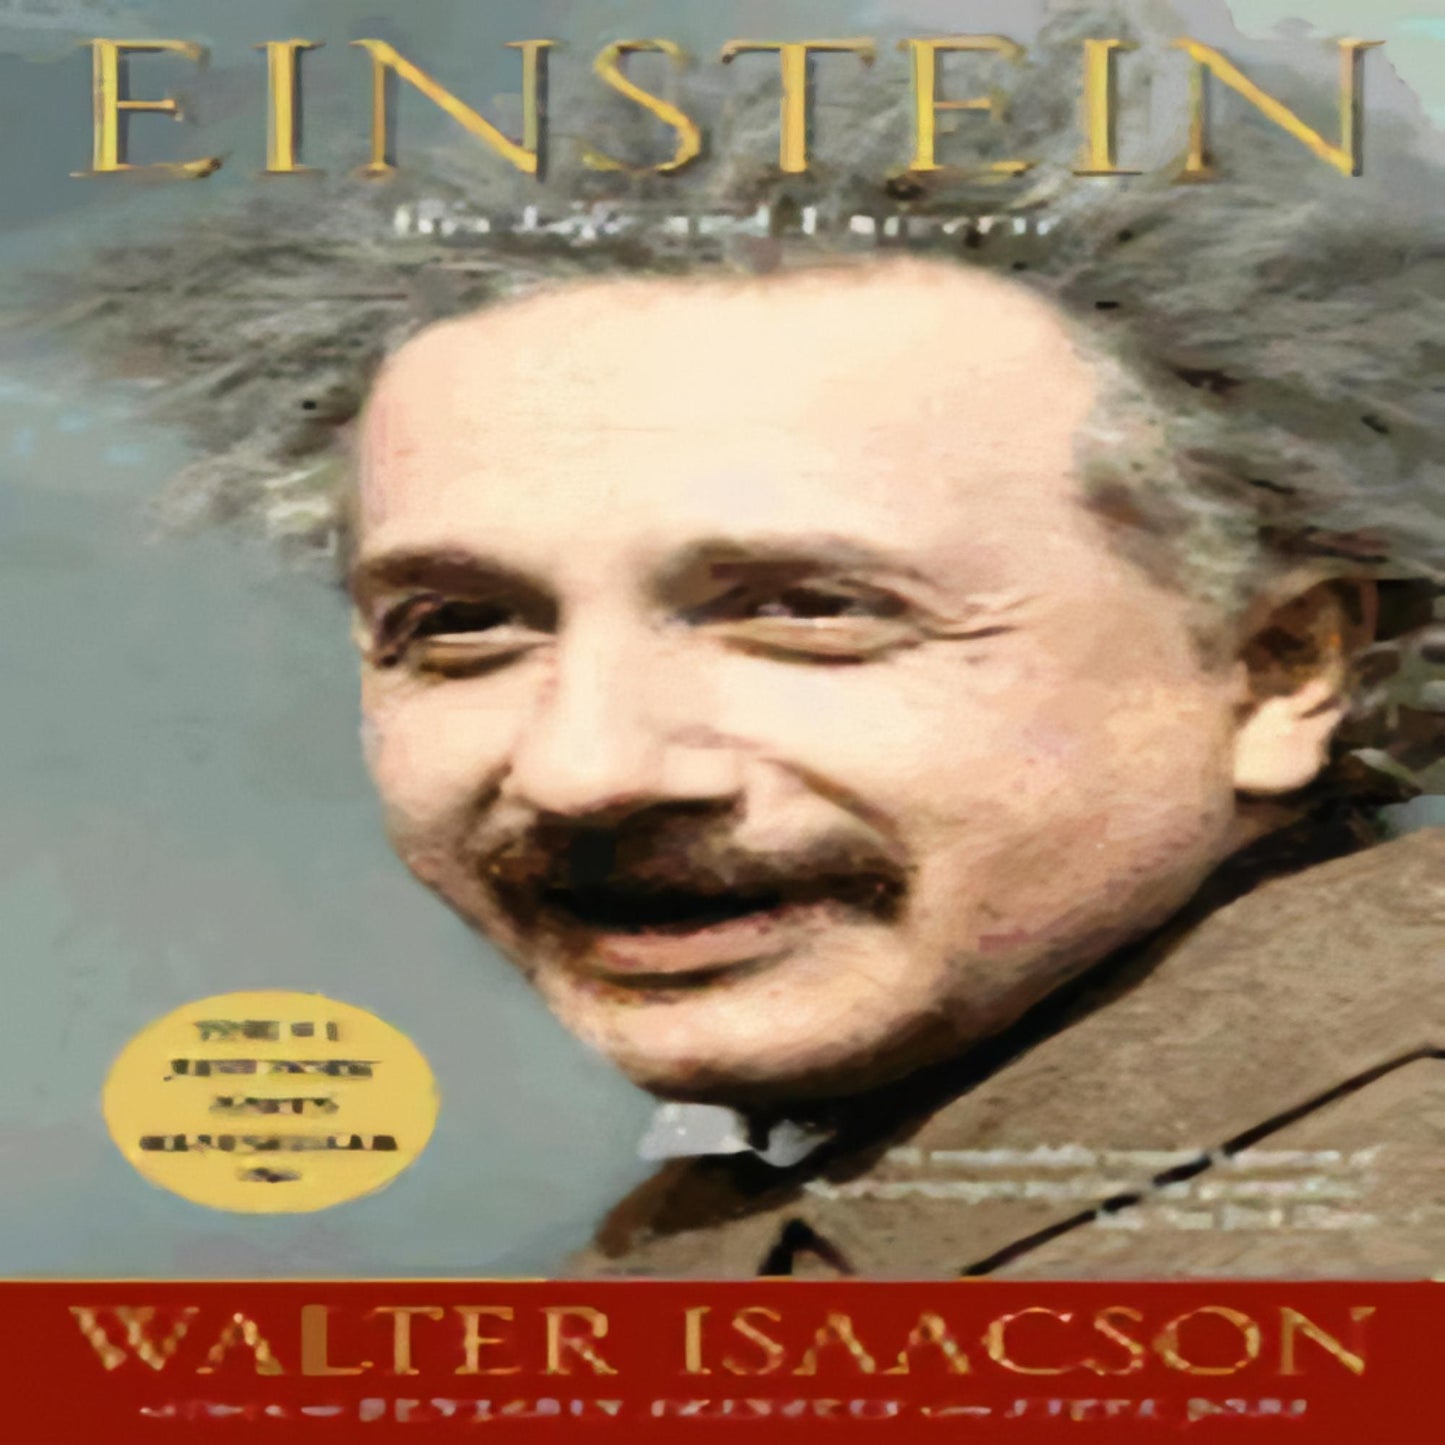 Einstein: His Life and Universe38-012023-0743264746DPGBOOKSTORE.COM. Today's Bestsellers.